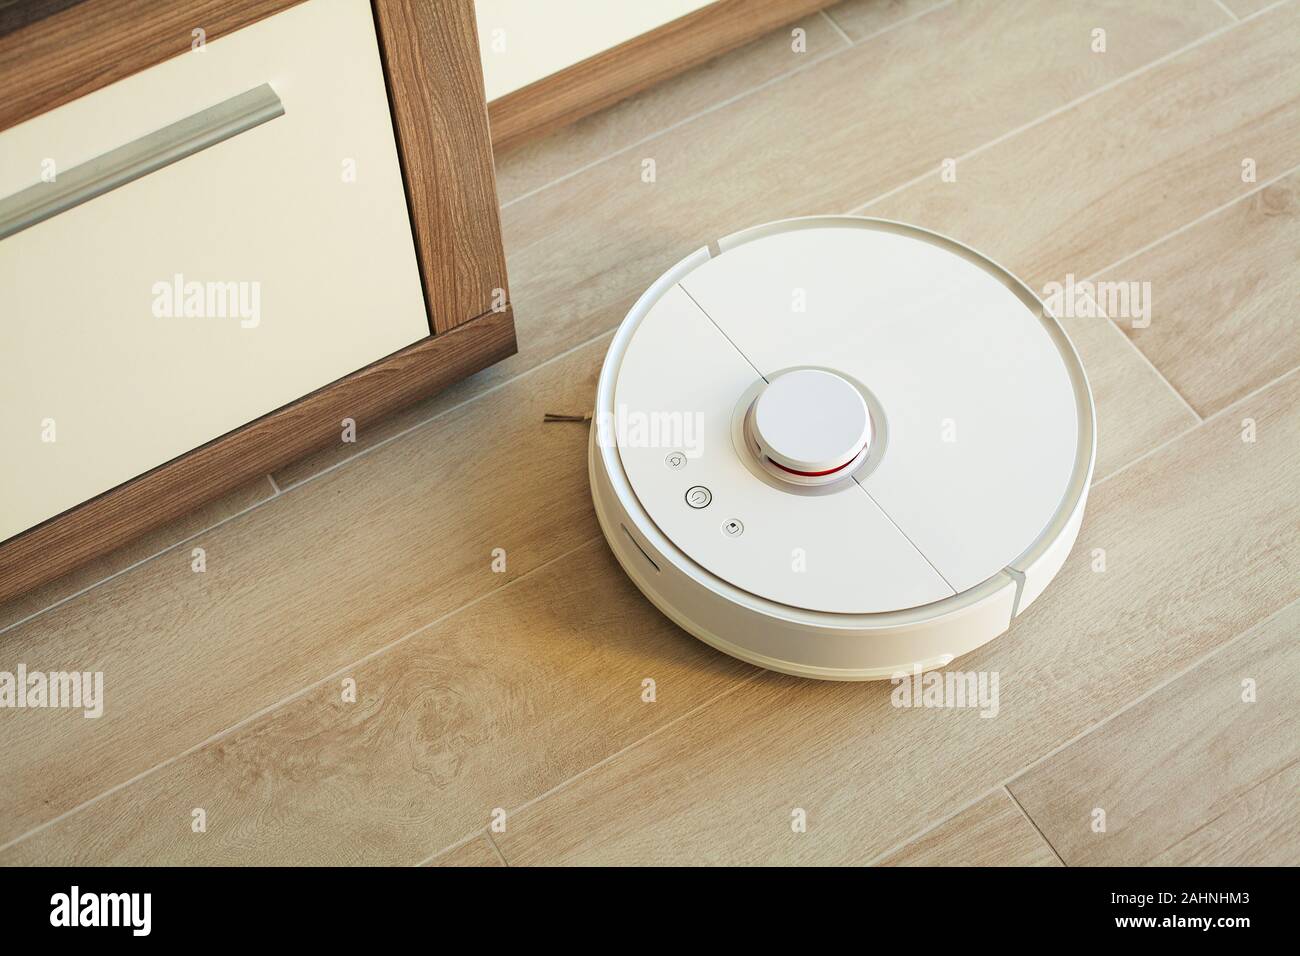 Smart House Vacuum Cleaner Robot Runs On Wood Floor In A Living